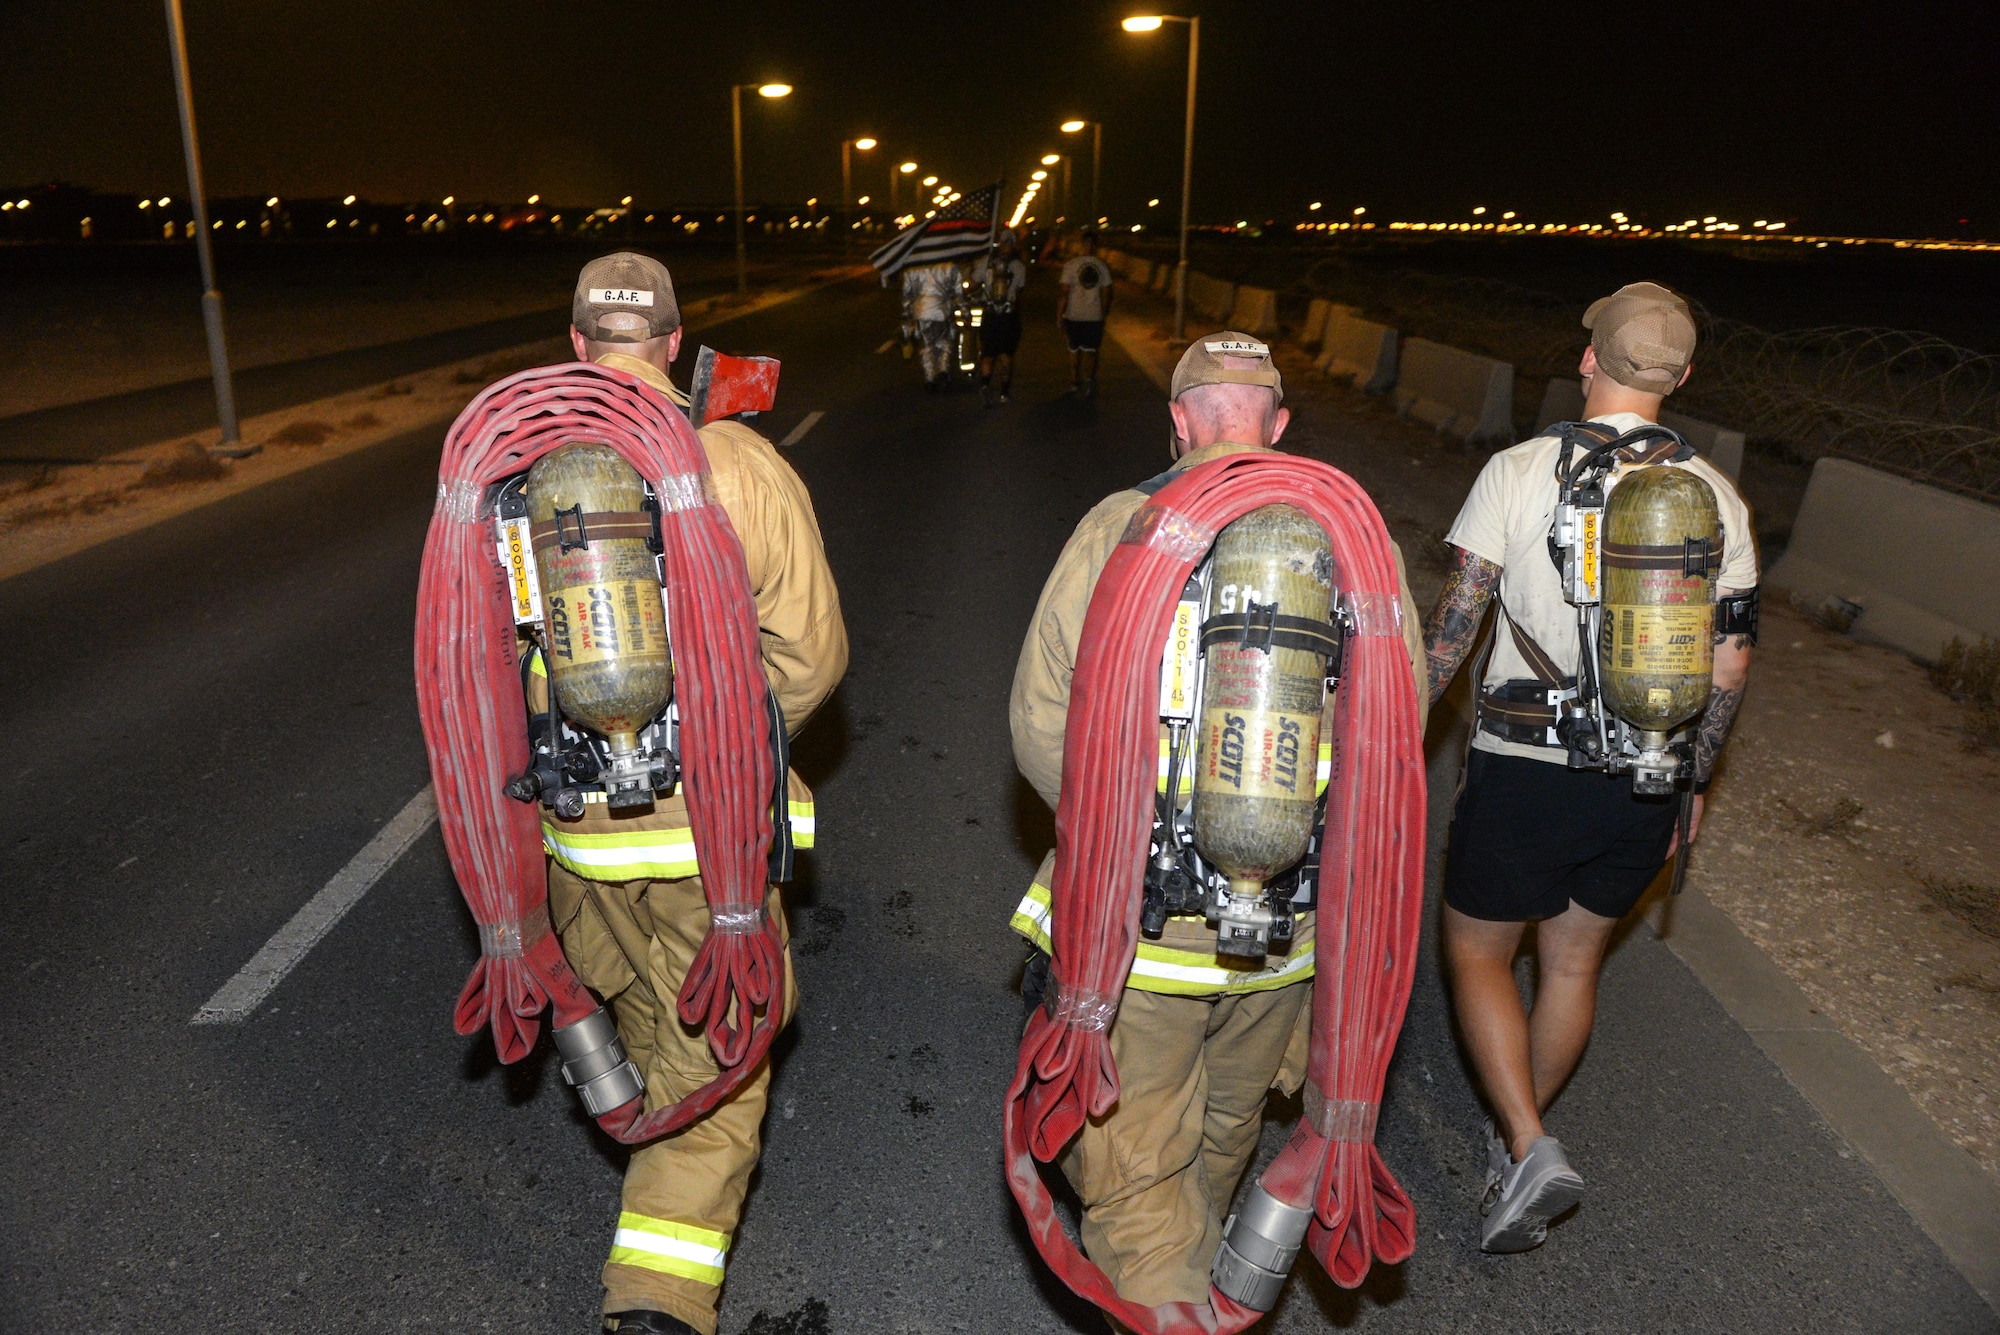 U.S. Air Force firefighters assigned to the 379th Expeditionary Civil Engineering Squadron carry fire hoses and wear self-contained breathing apparatus as they participate in an evening 9/11 memorial walk at Al Udeid Air Base, Qatar, Sept. 11, 2017.